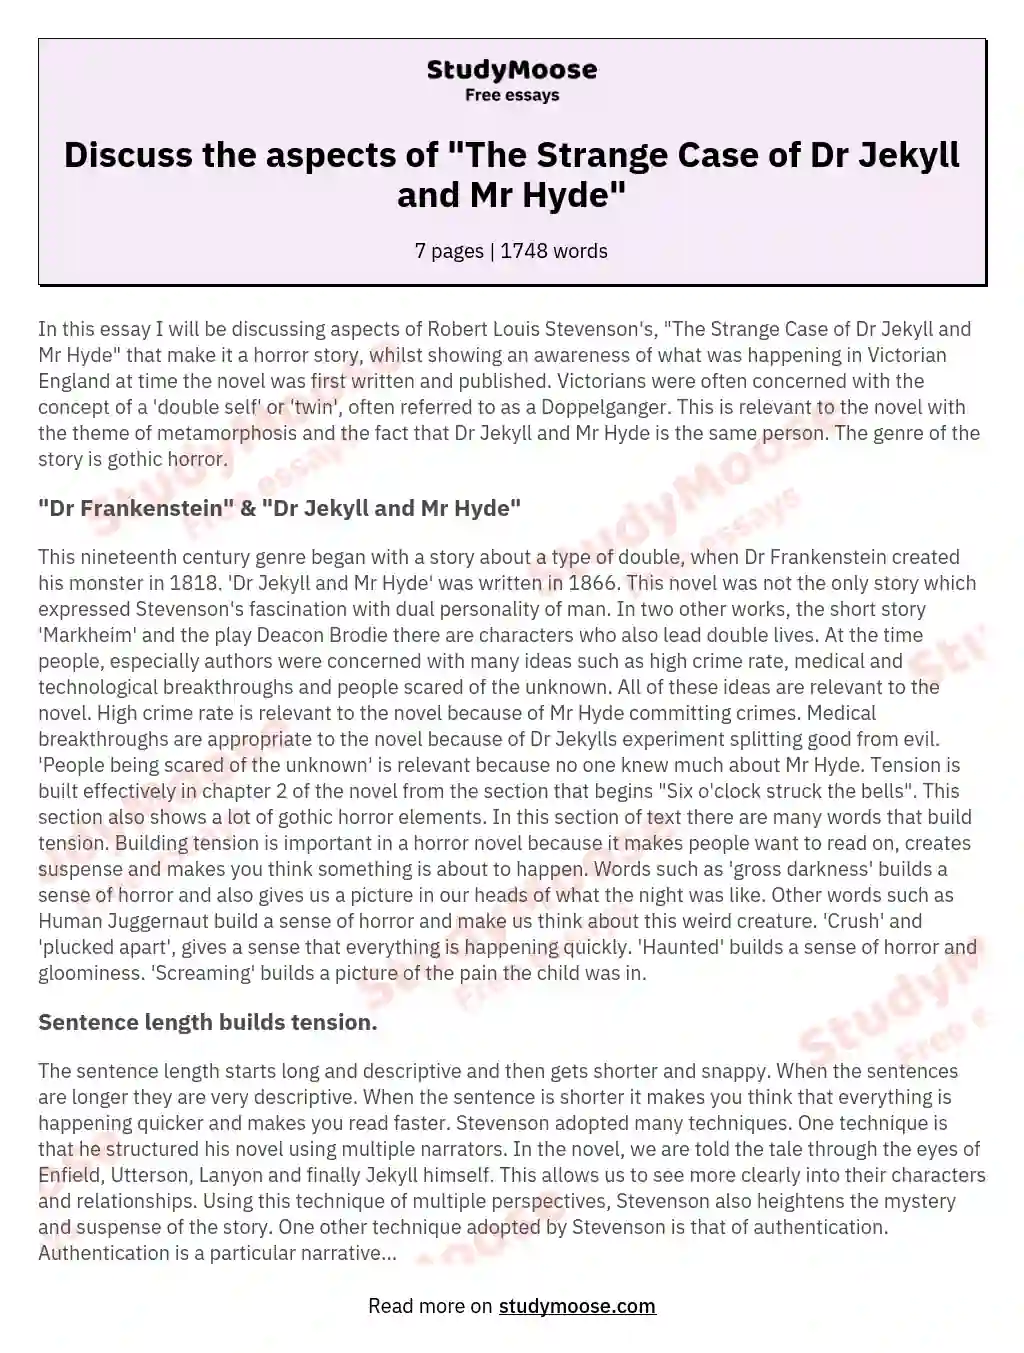 Discuss the aspects of "The Strange Case of Dr Jekyll and Mr Hyde" essay